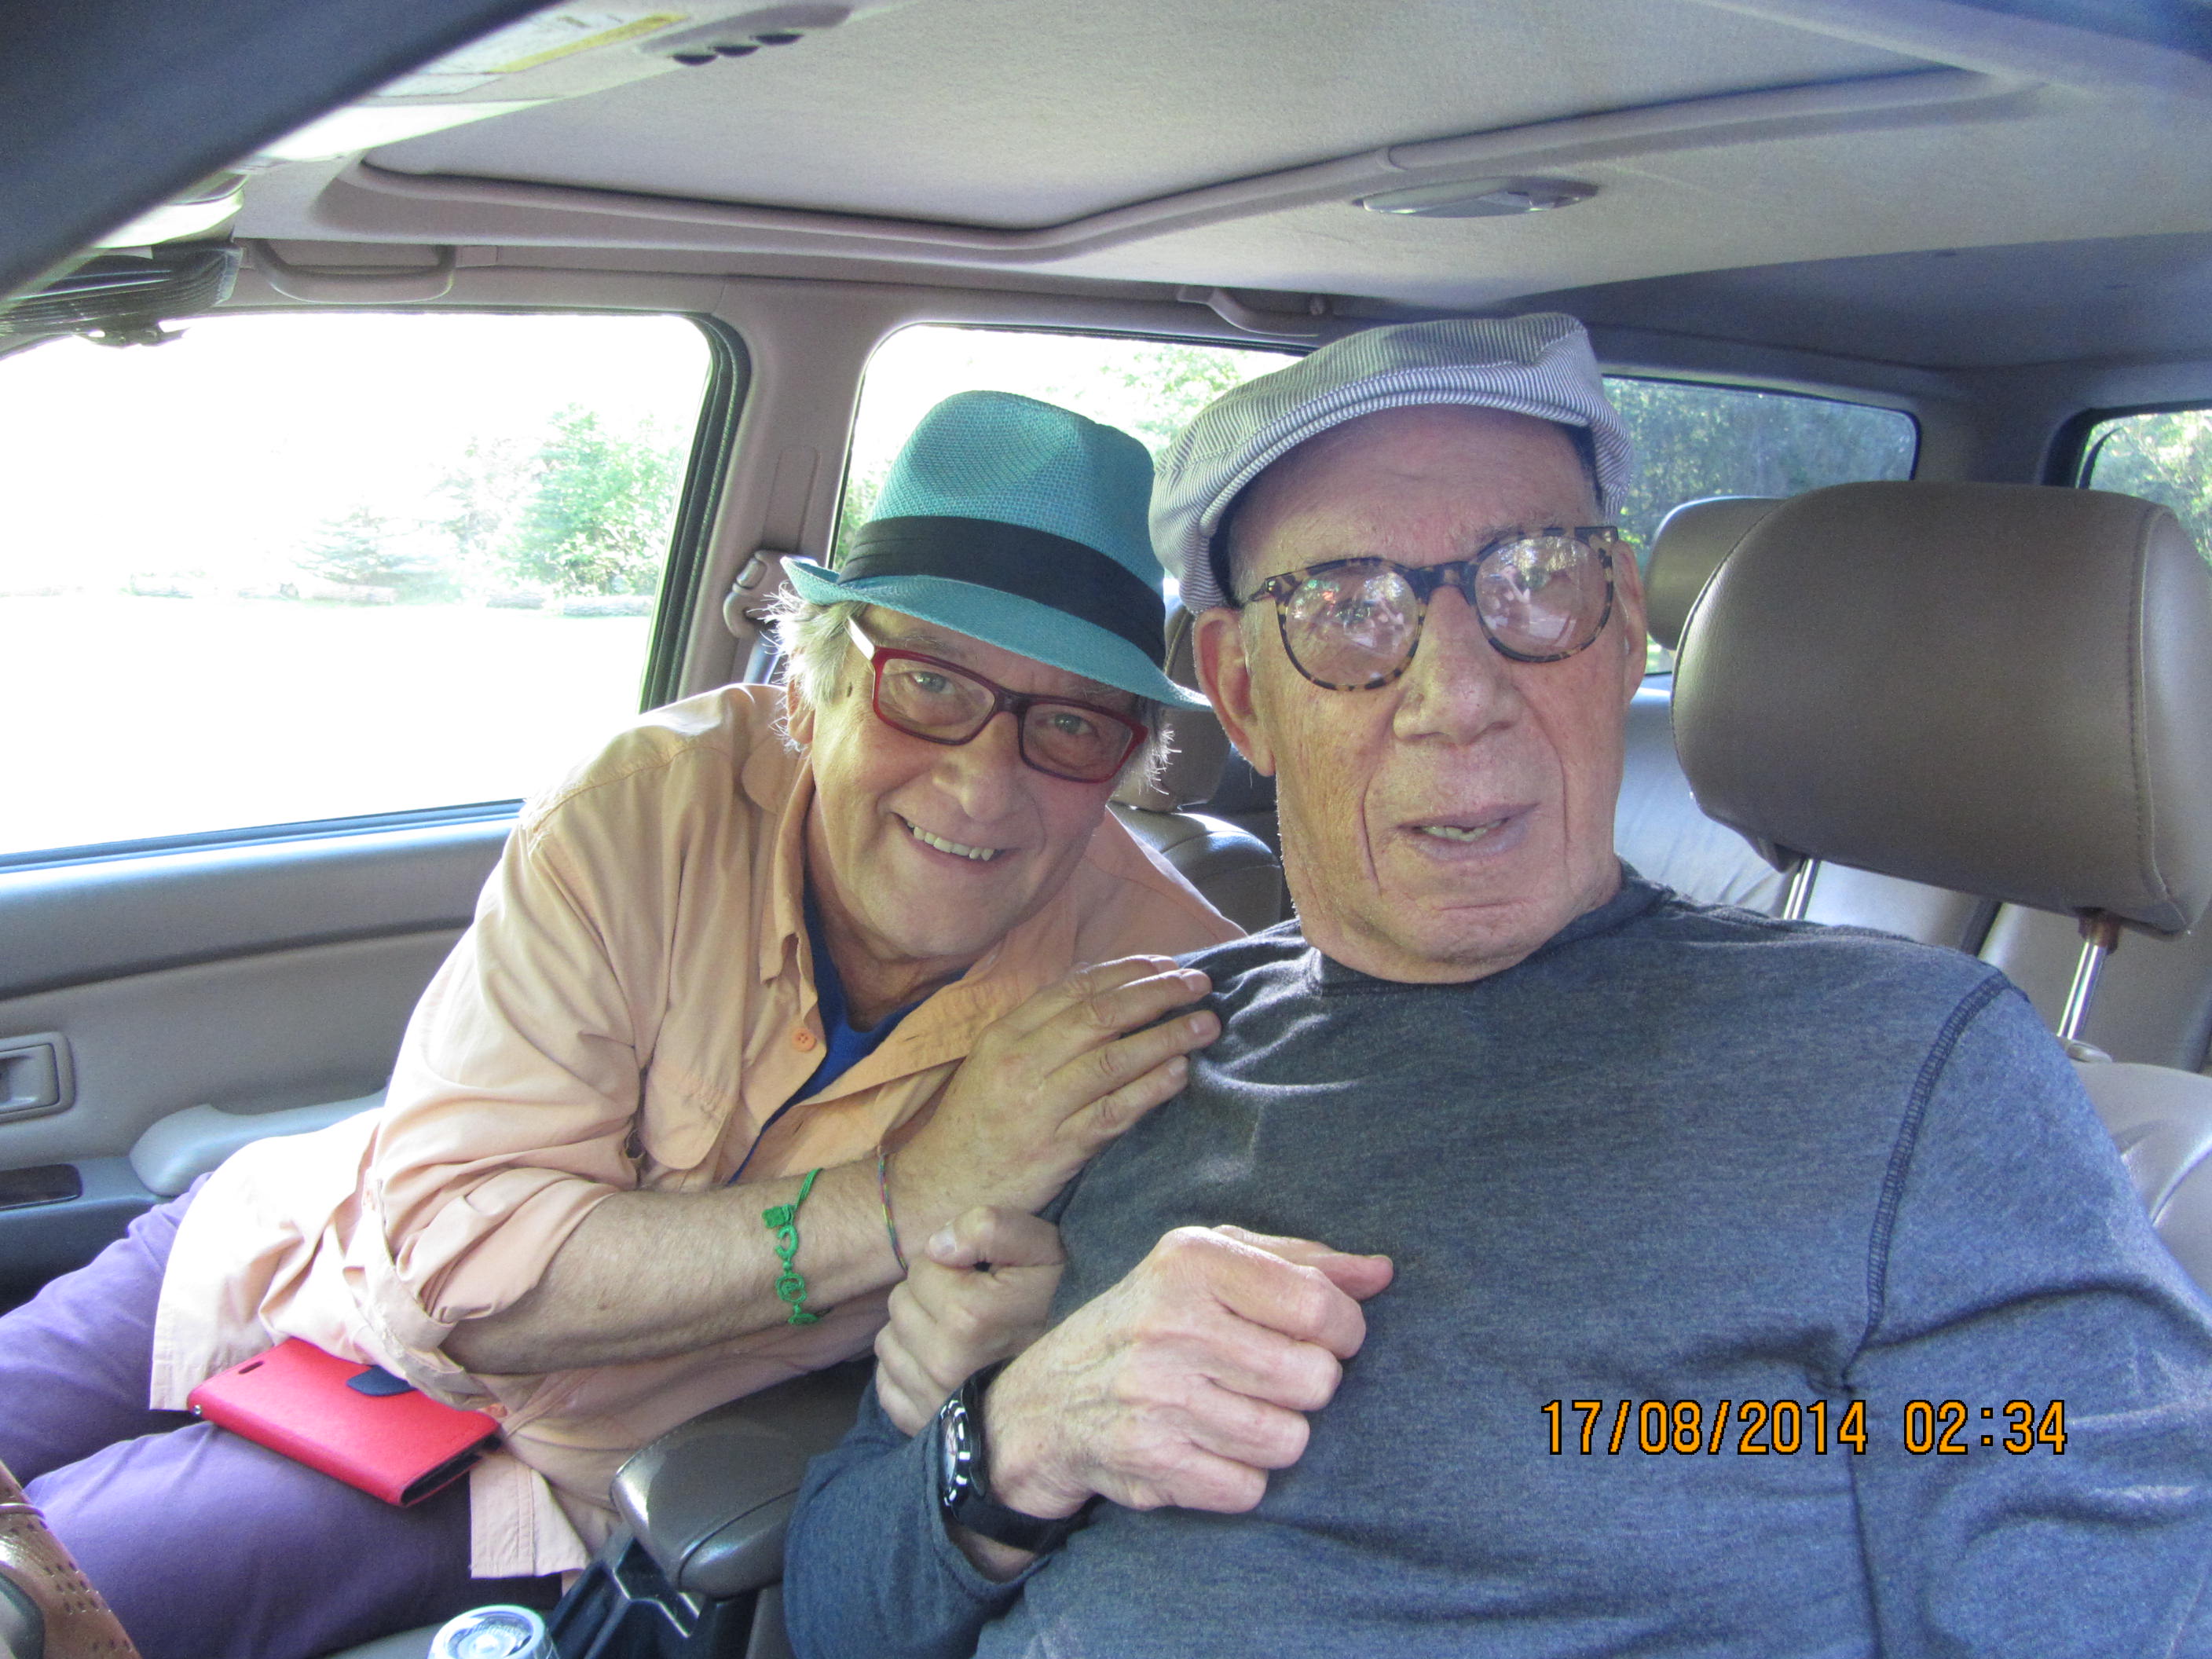 with Bob Rafelson in Aspen